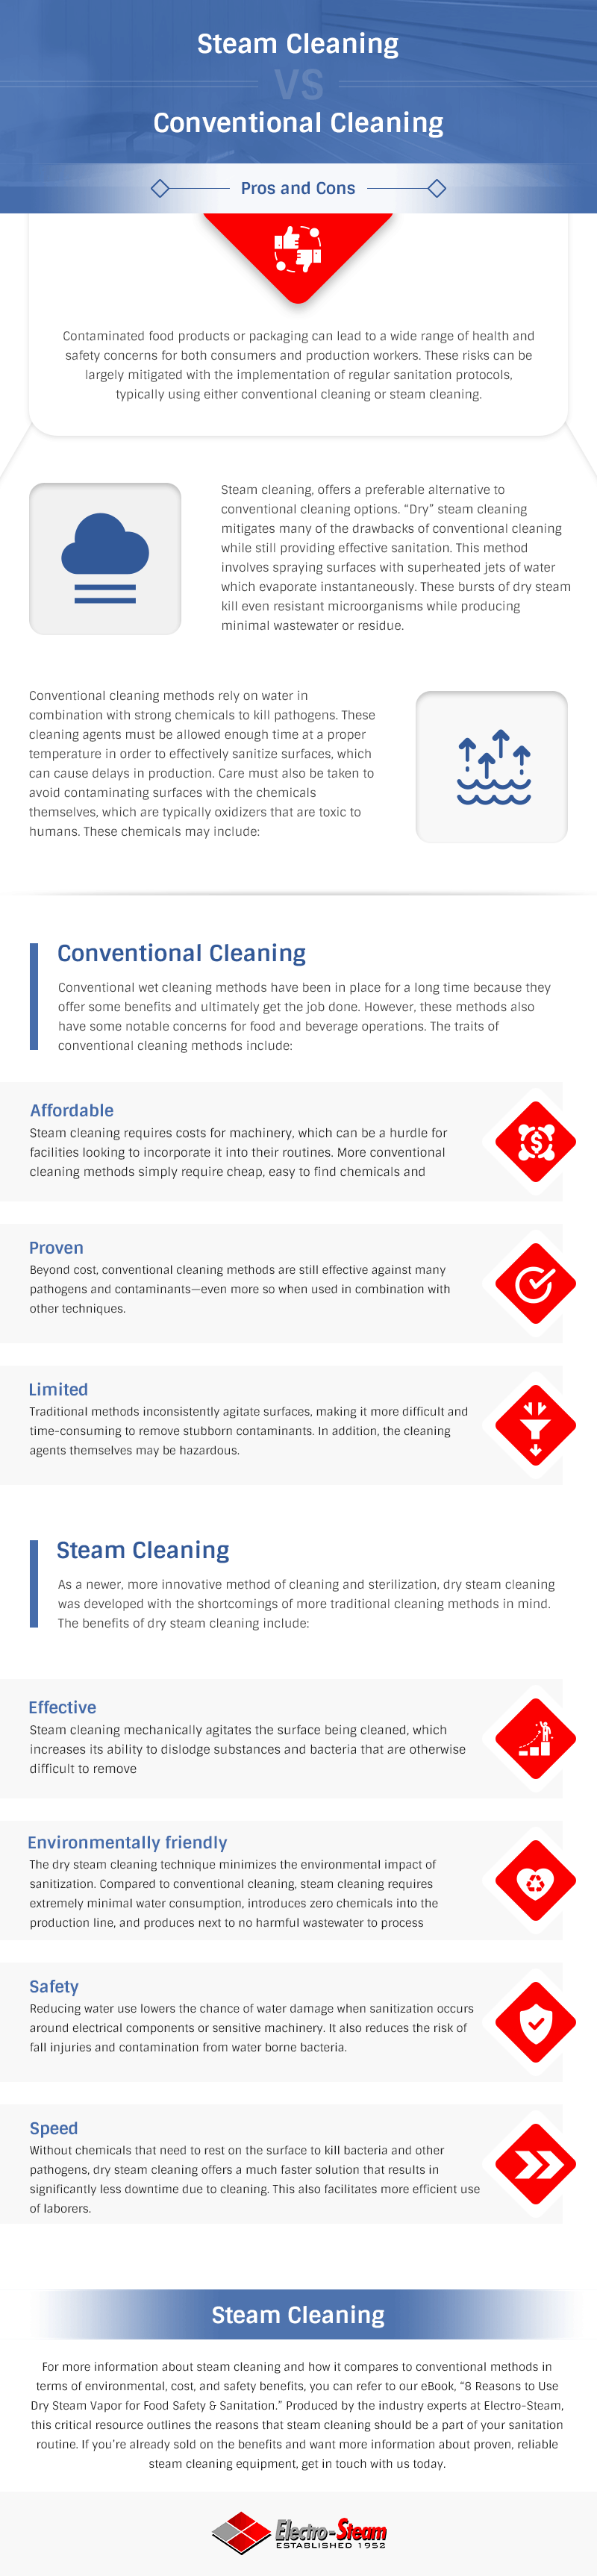 Steam Cleaning vs. Conventional Cleaning Infographic